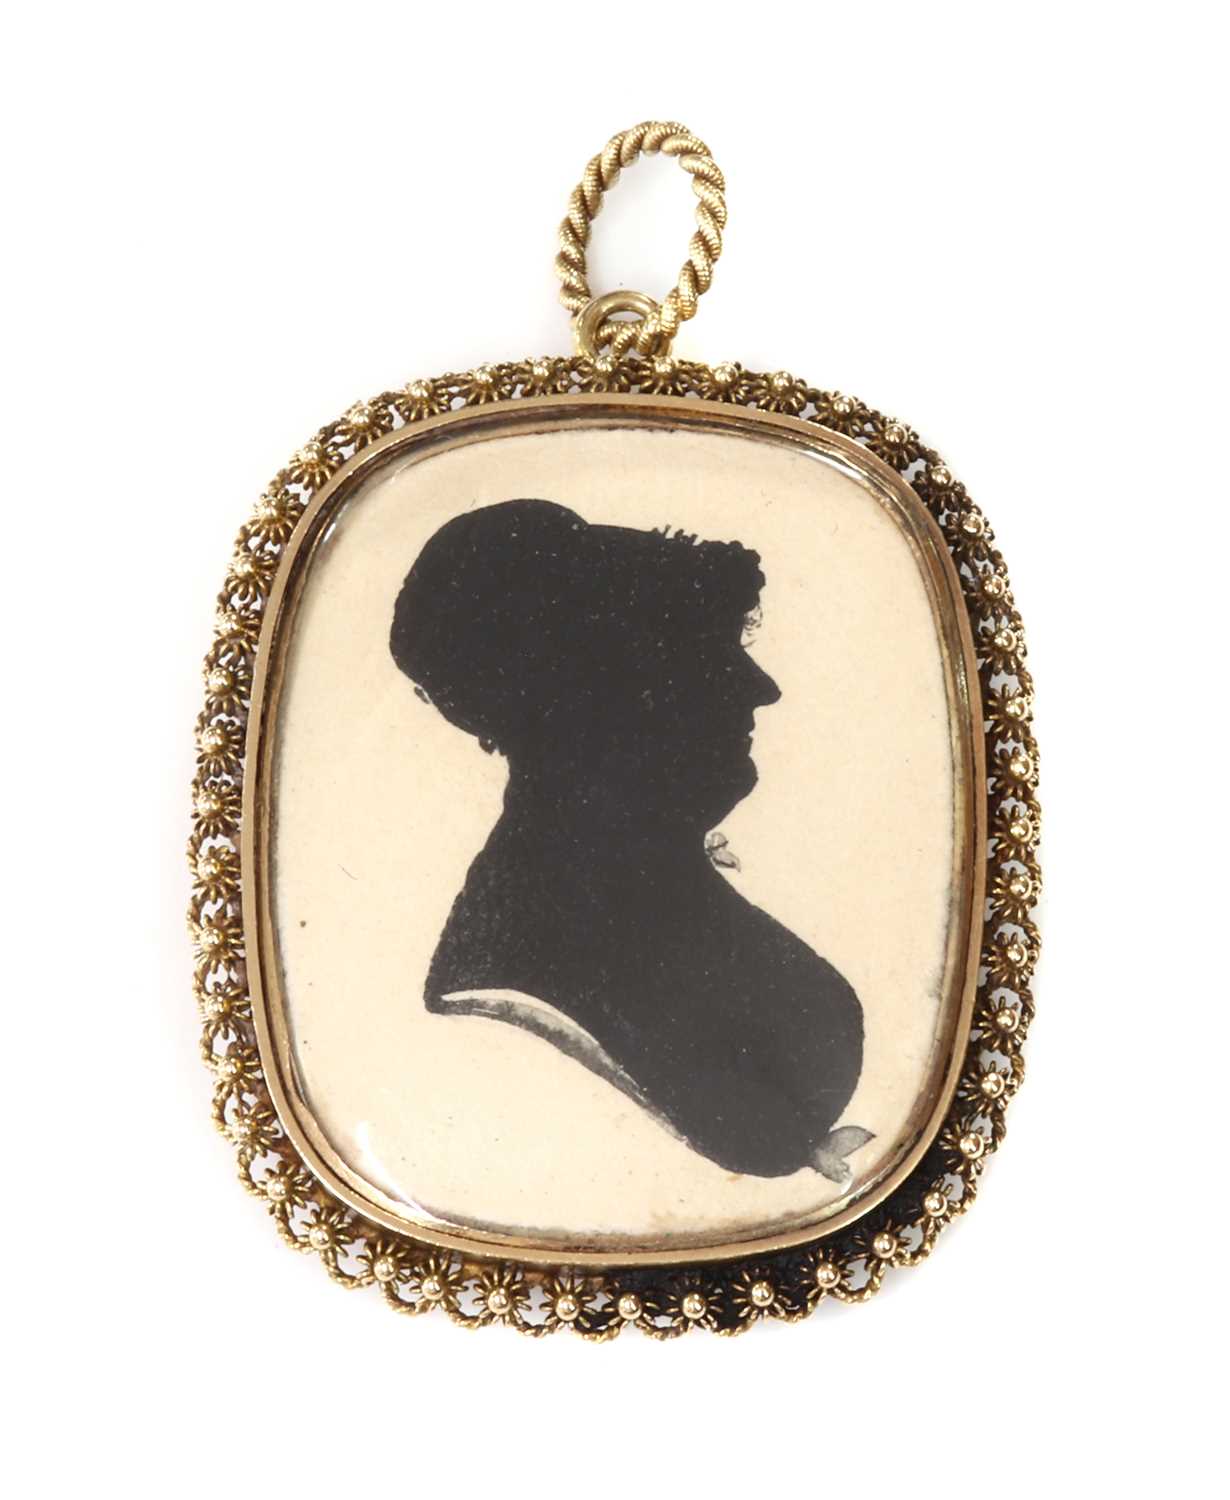 Lot 28 - A Regency gold mounted painted silhouette pendant